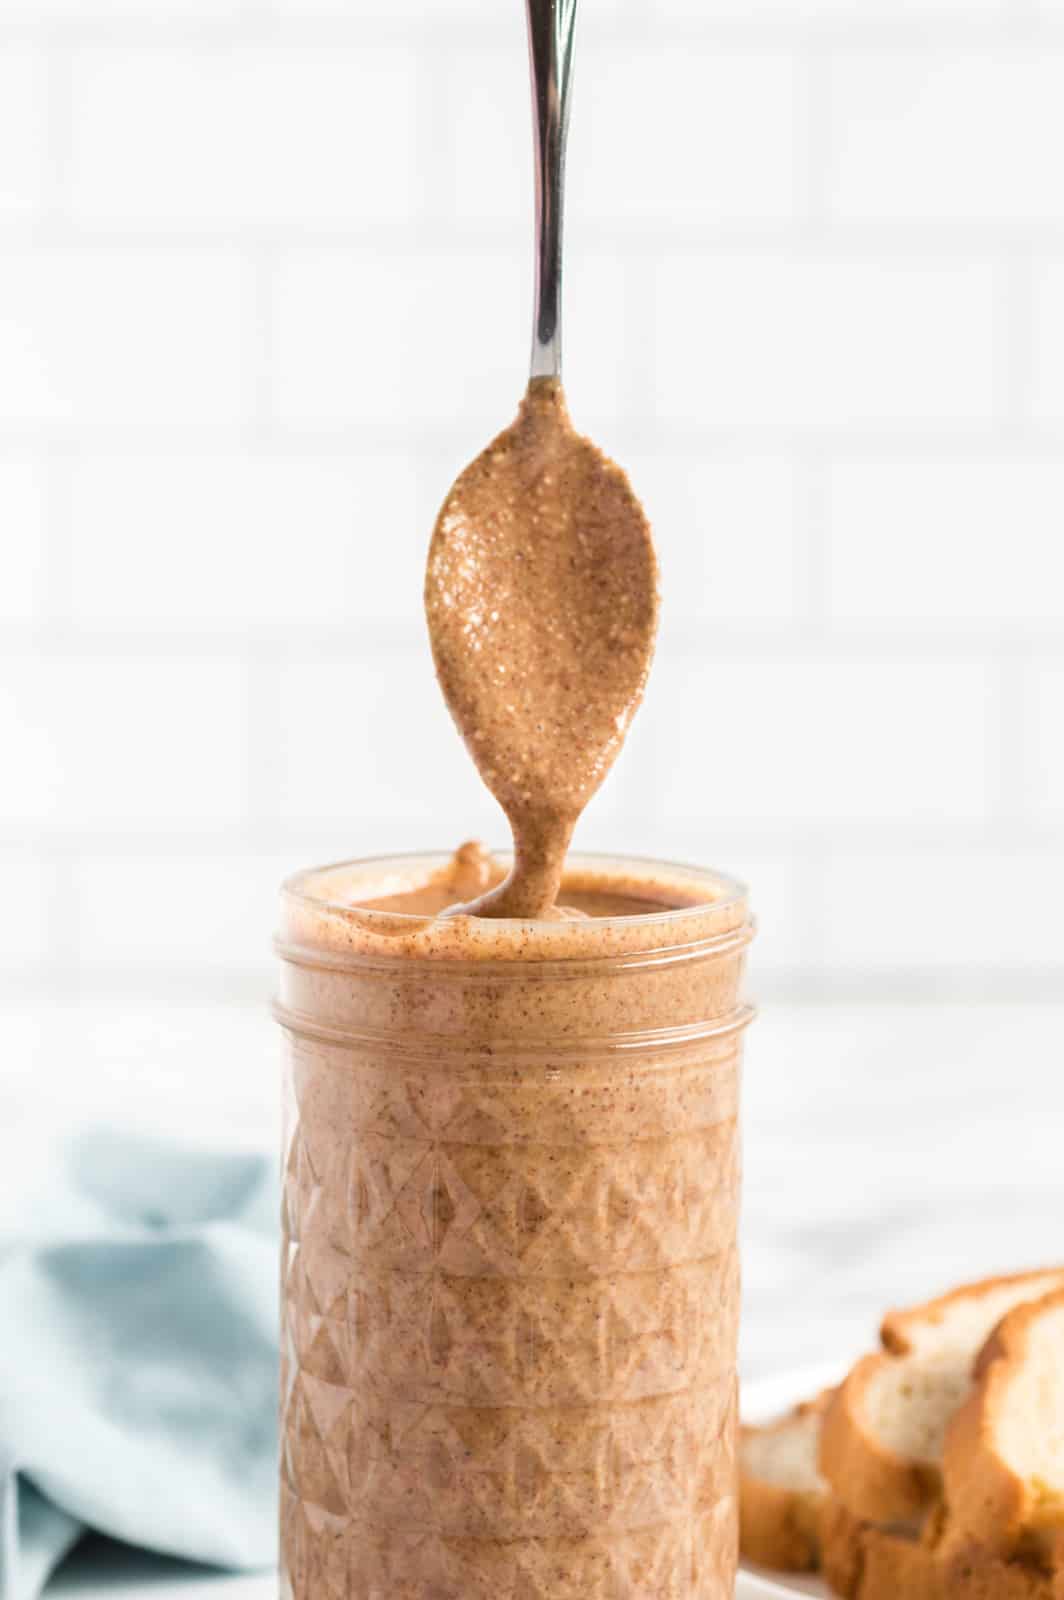 Spoon showing almond butter in jar pulling up